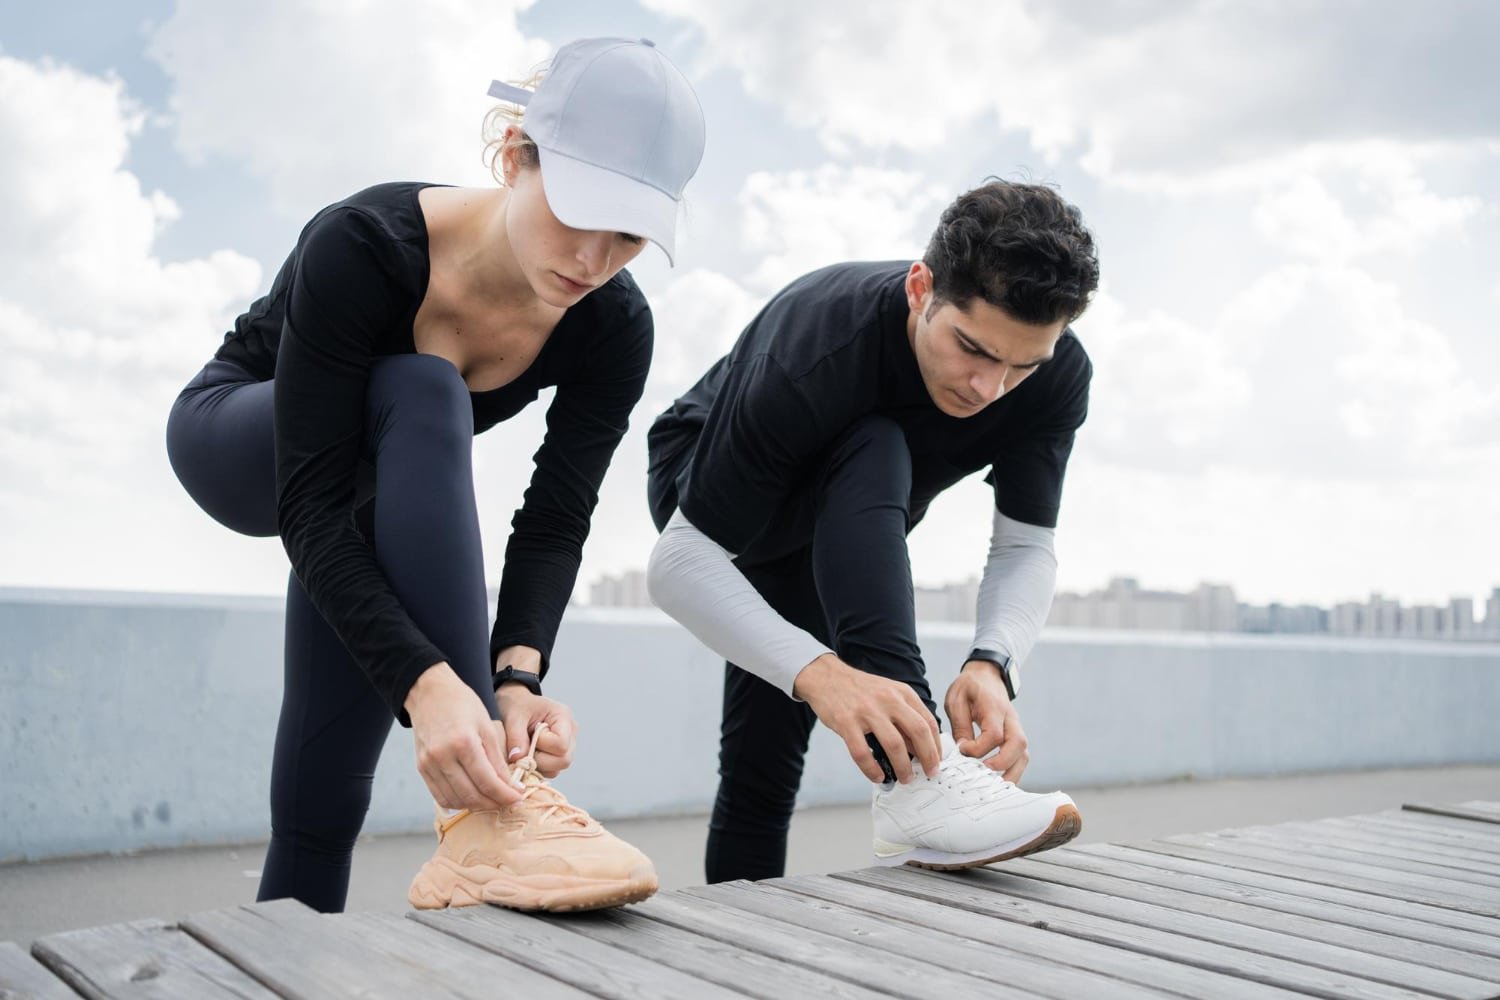 New Balance Performance Footwear for Every Athlete